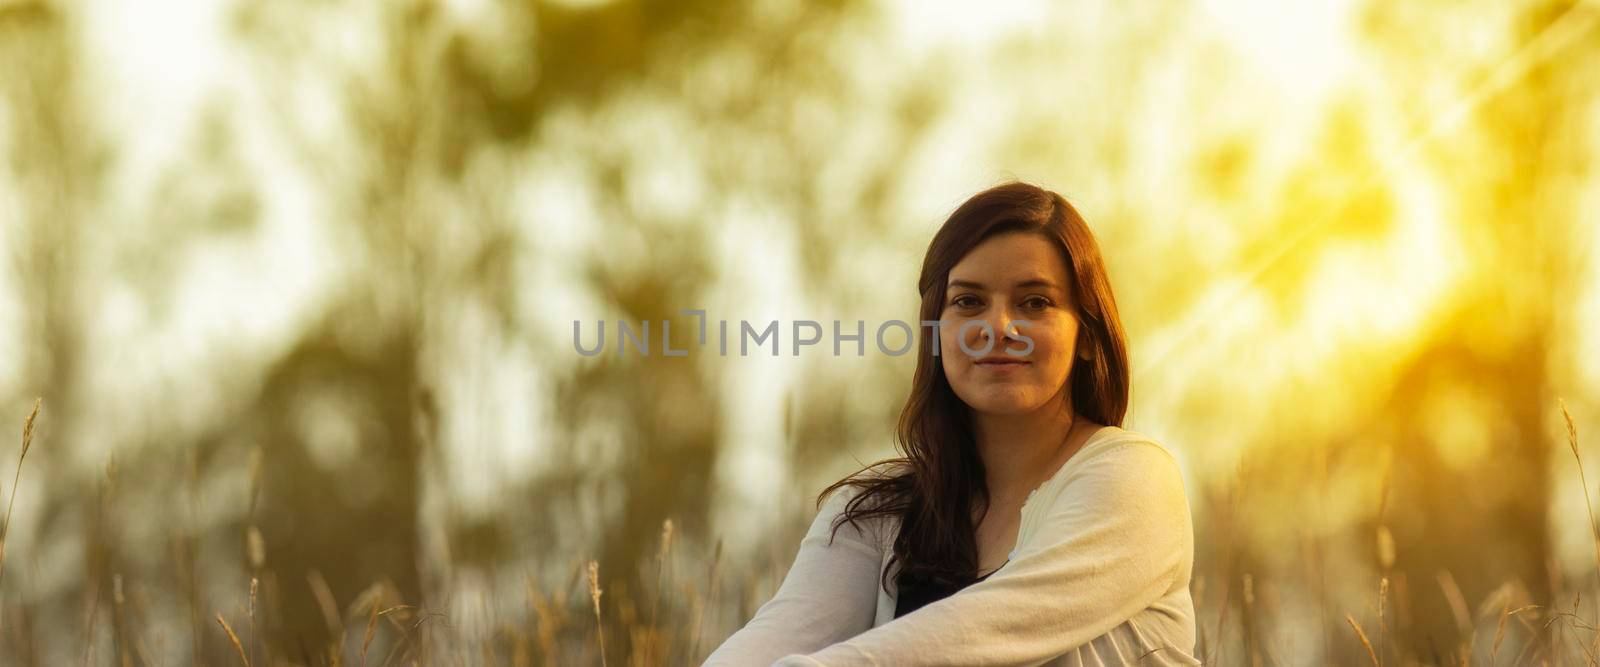 Portrait of beautiful Hispanic young woman with long hair looking at the camera against a background of unfocused trees during sunset by alejomiranda